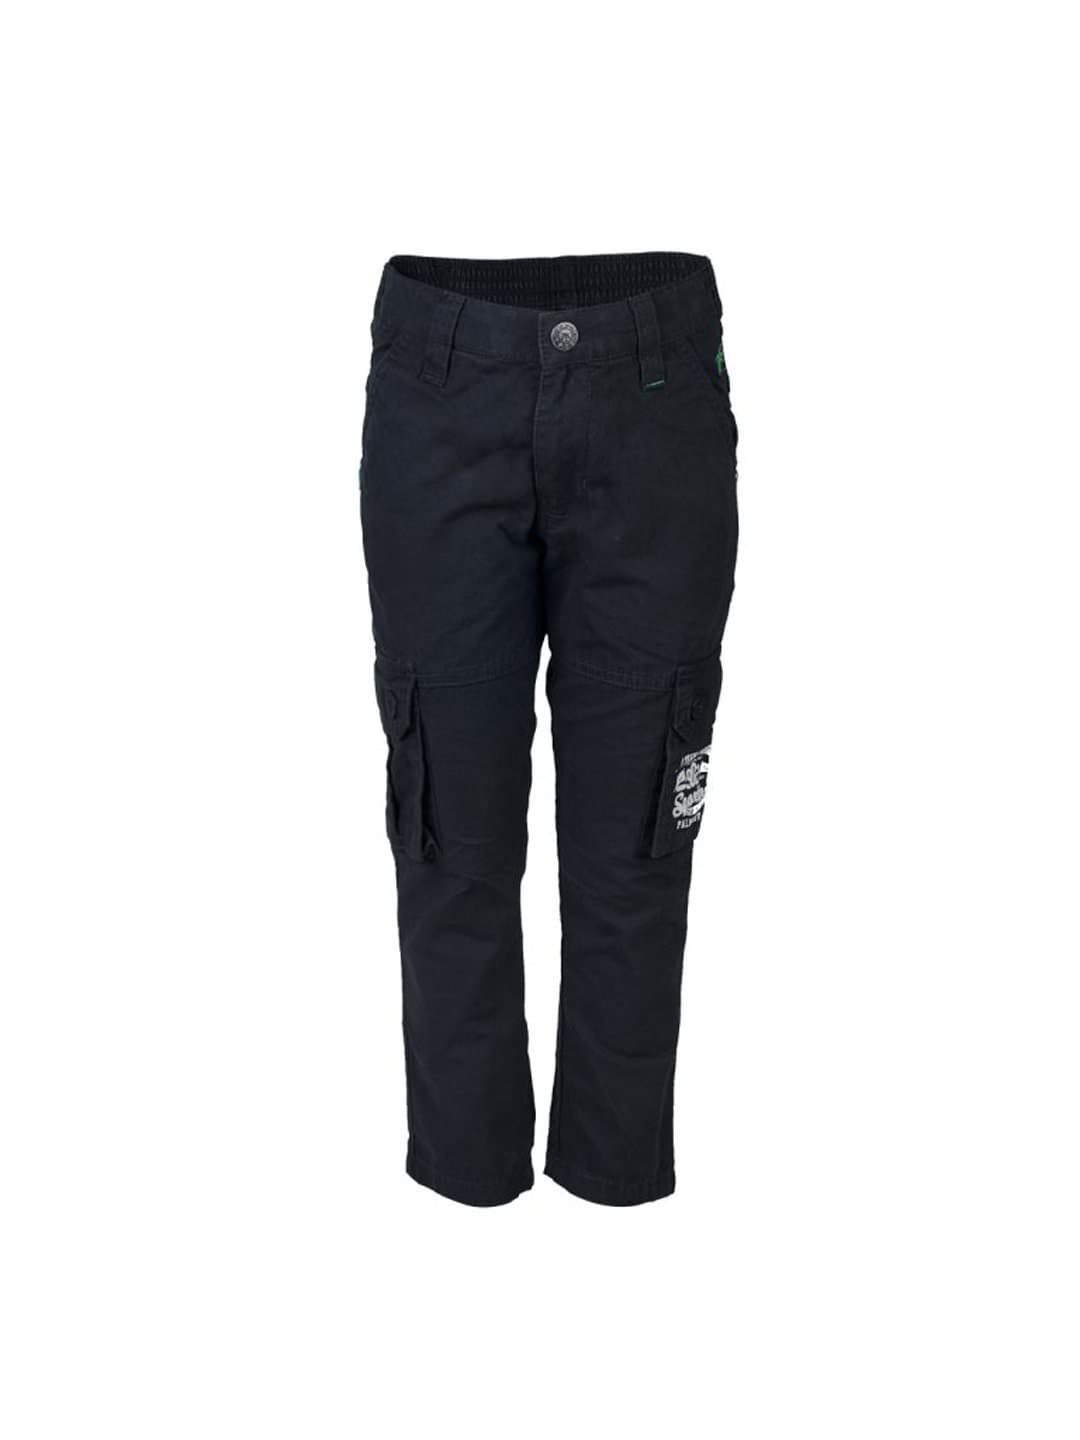 Palm Tree Kids Boy Solid Navy Blue Trousers